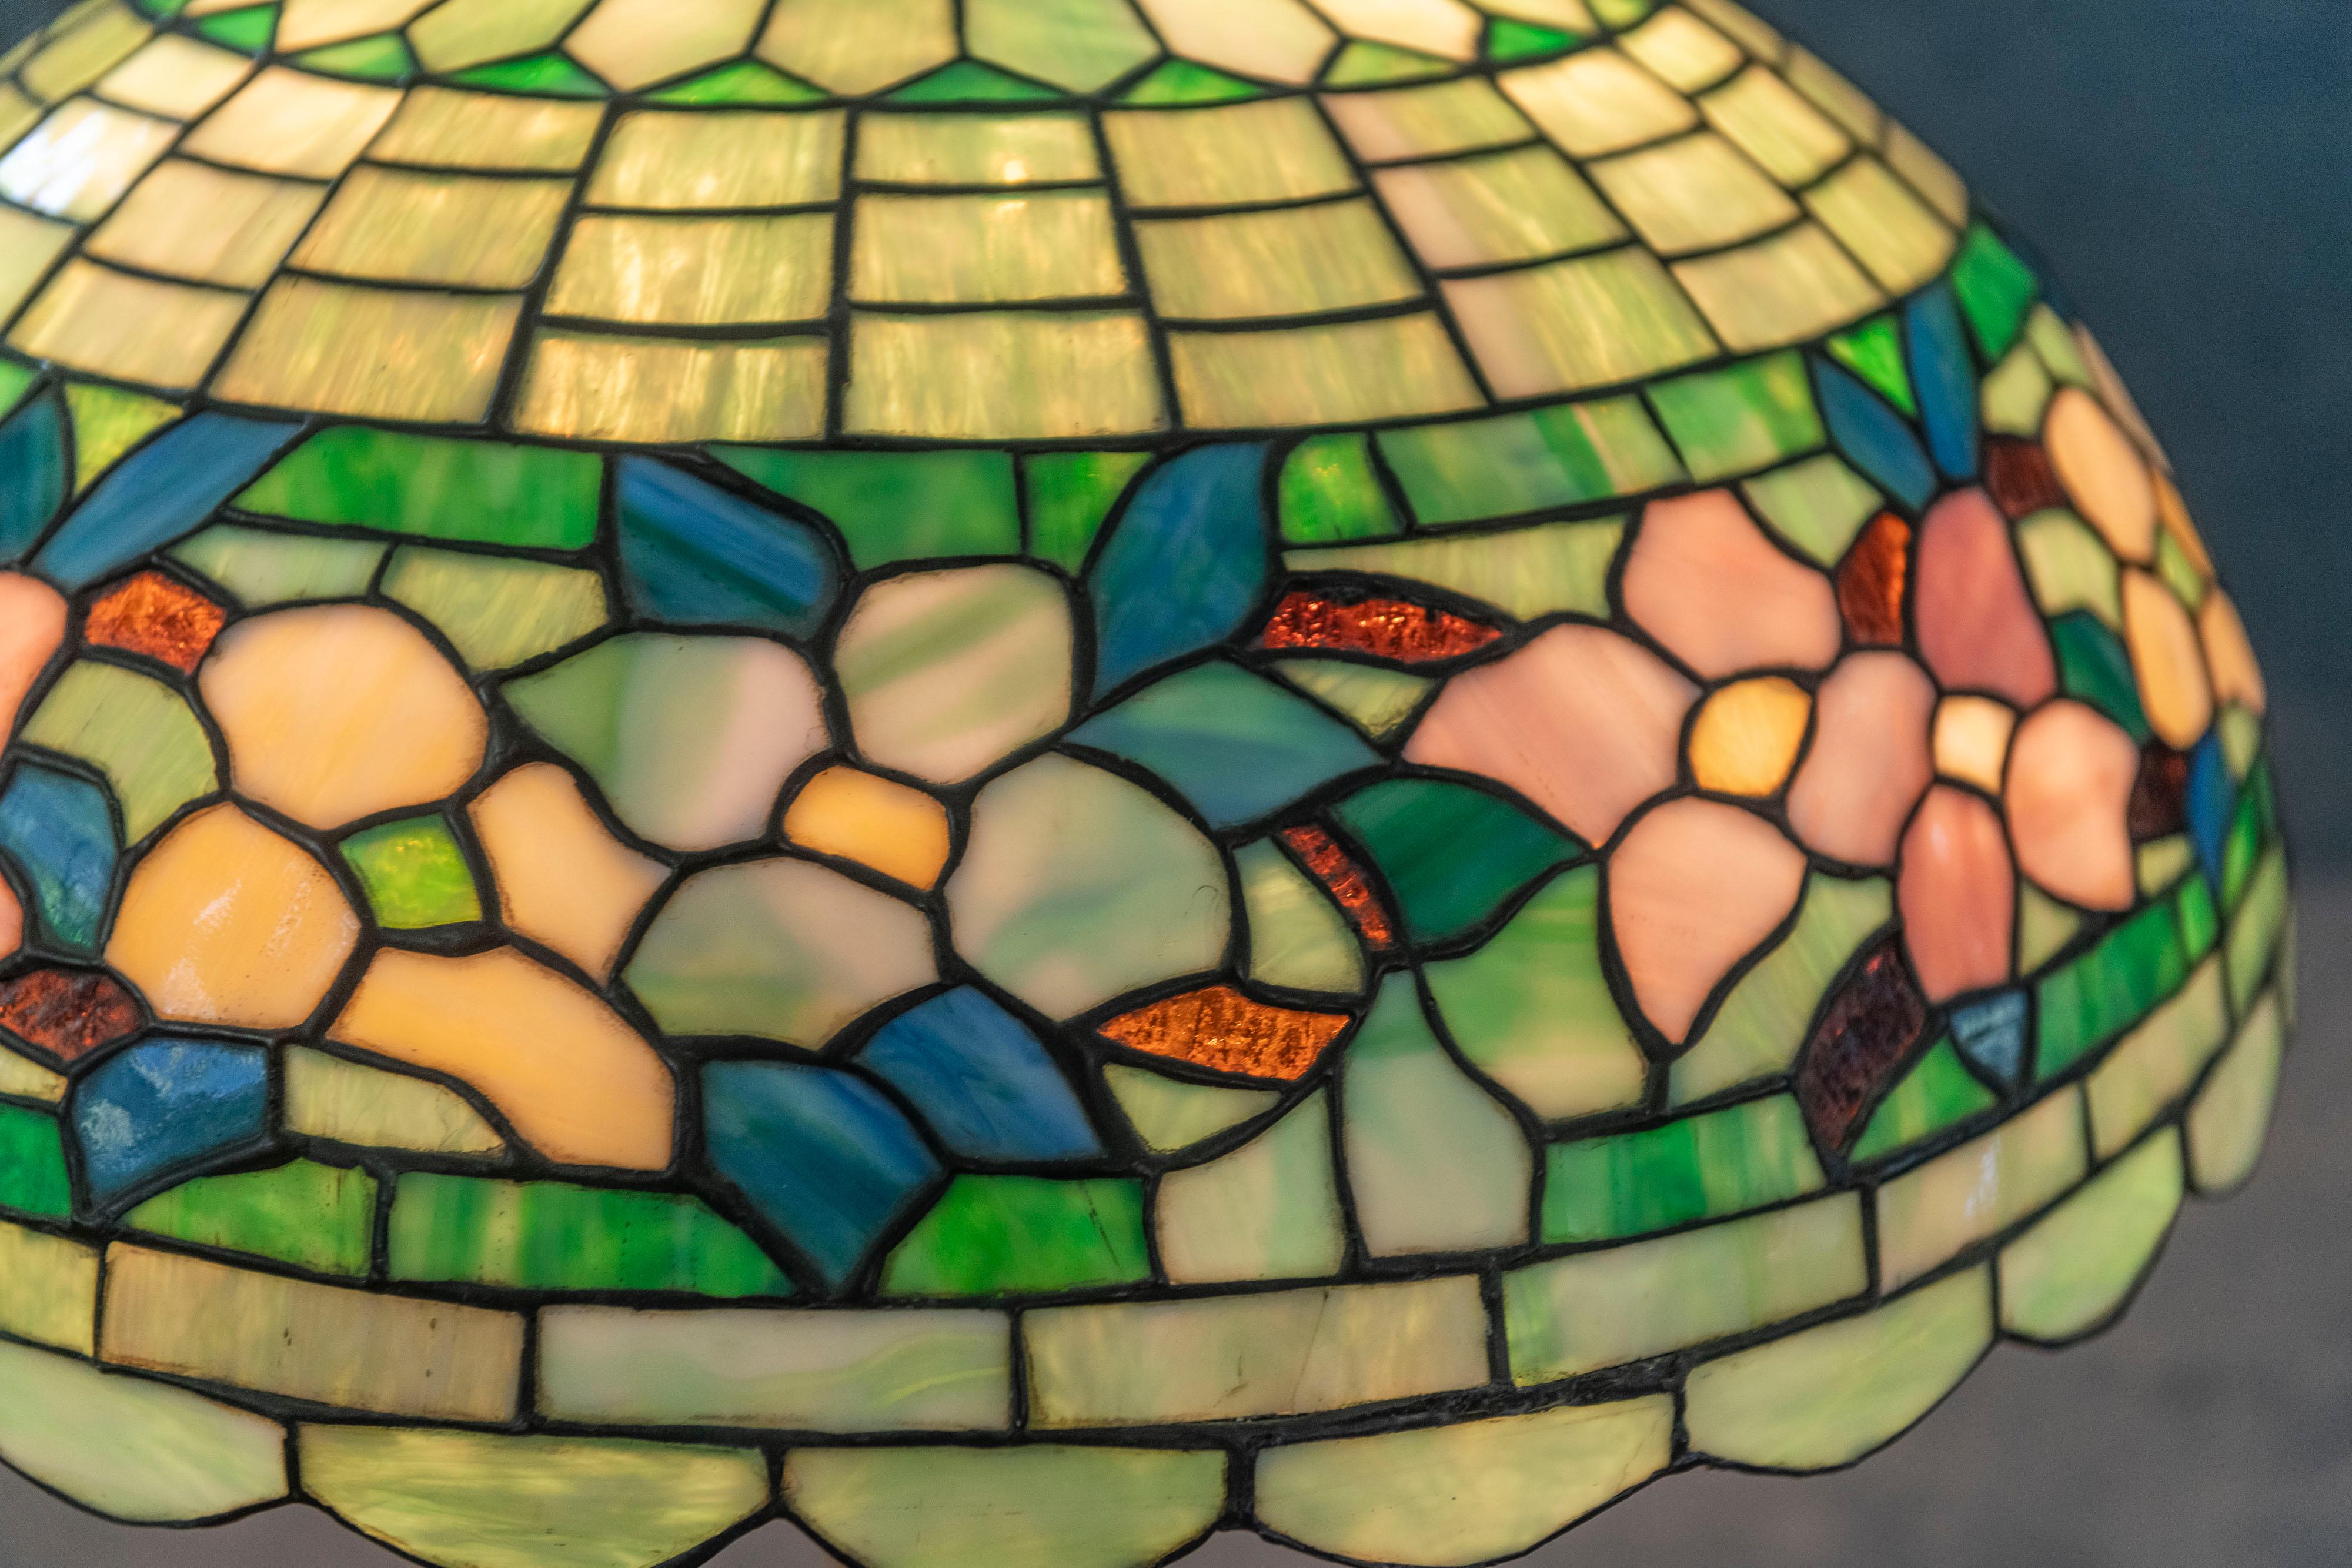 Art Nouveau Large Antique Leaded Glass Table Lamp by Wilkinson Co. B'klyn N.Y ca. 1910 For Sale